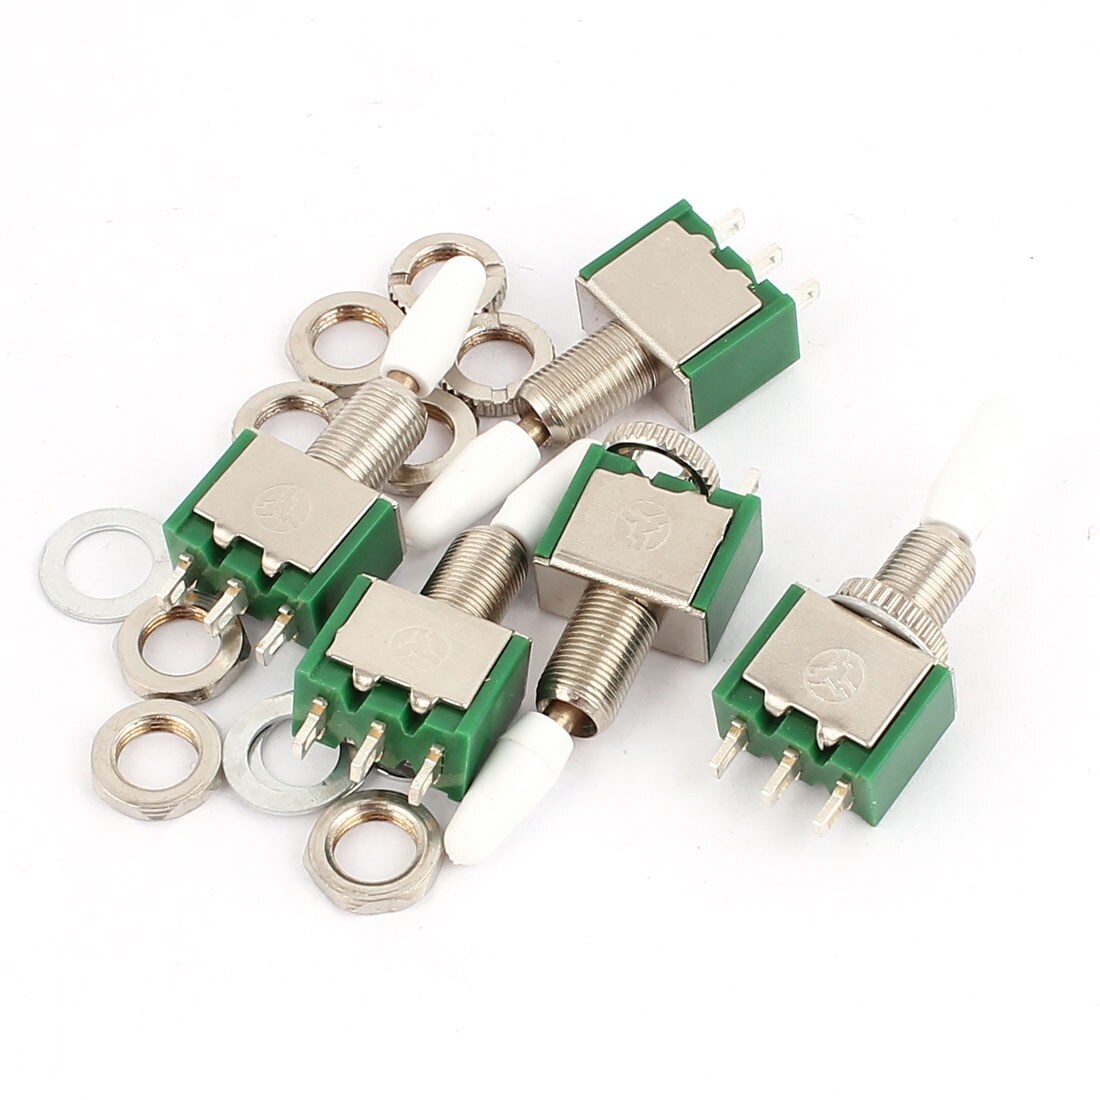 5PCS AC ON/OFF SPDT 2 Position Latching Toggle Schalter Useful New 